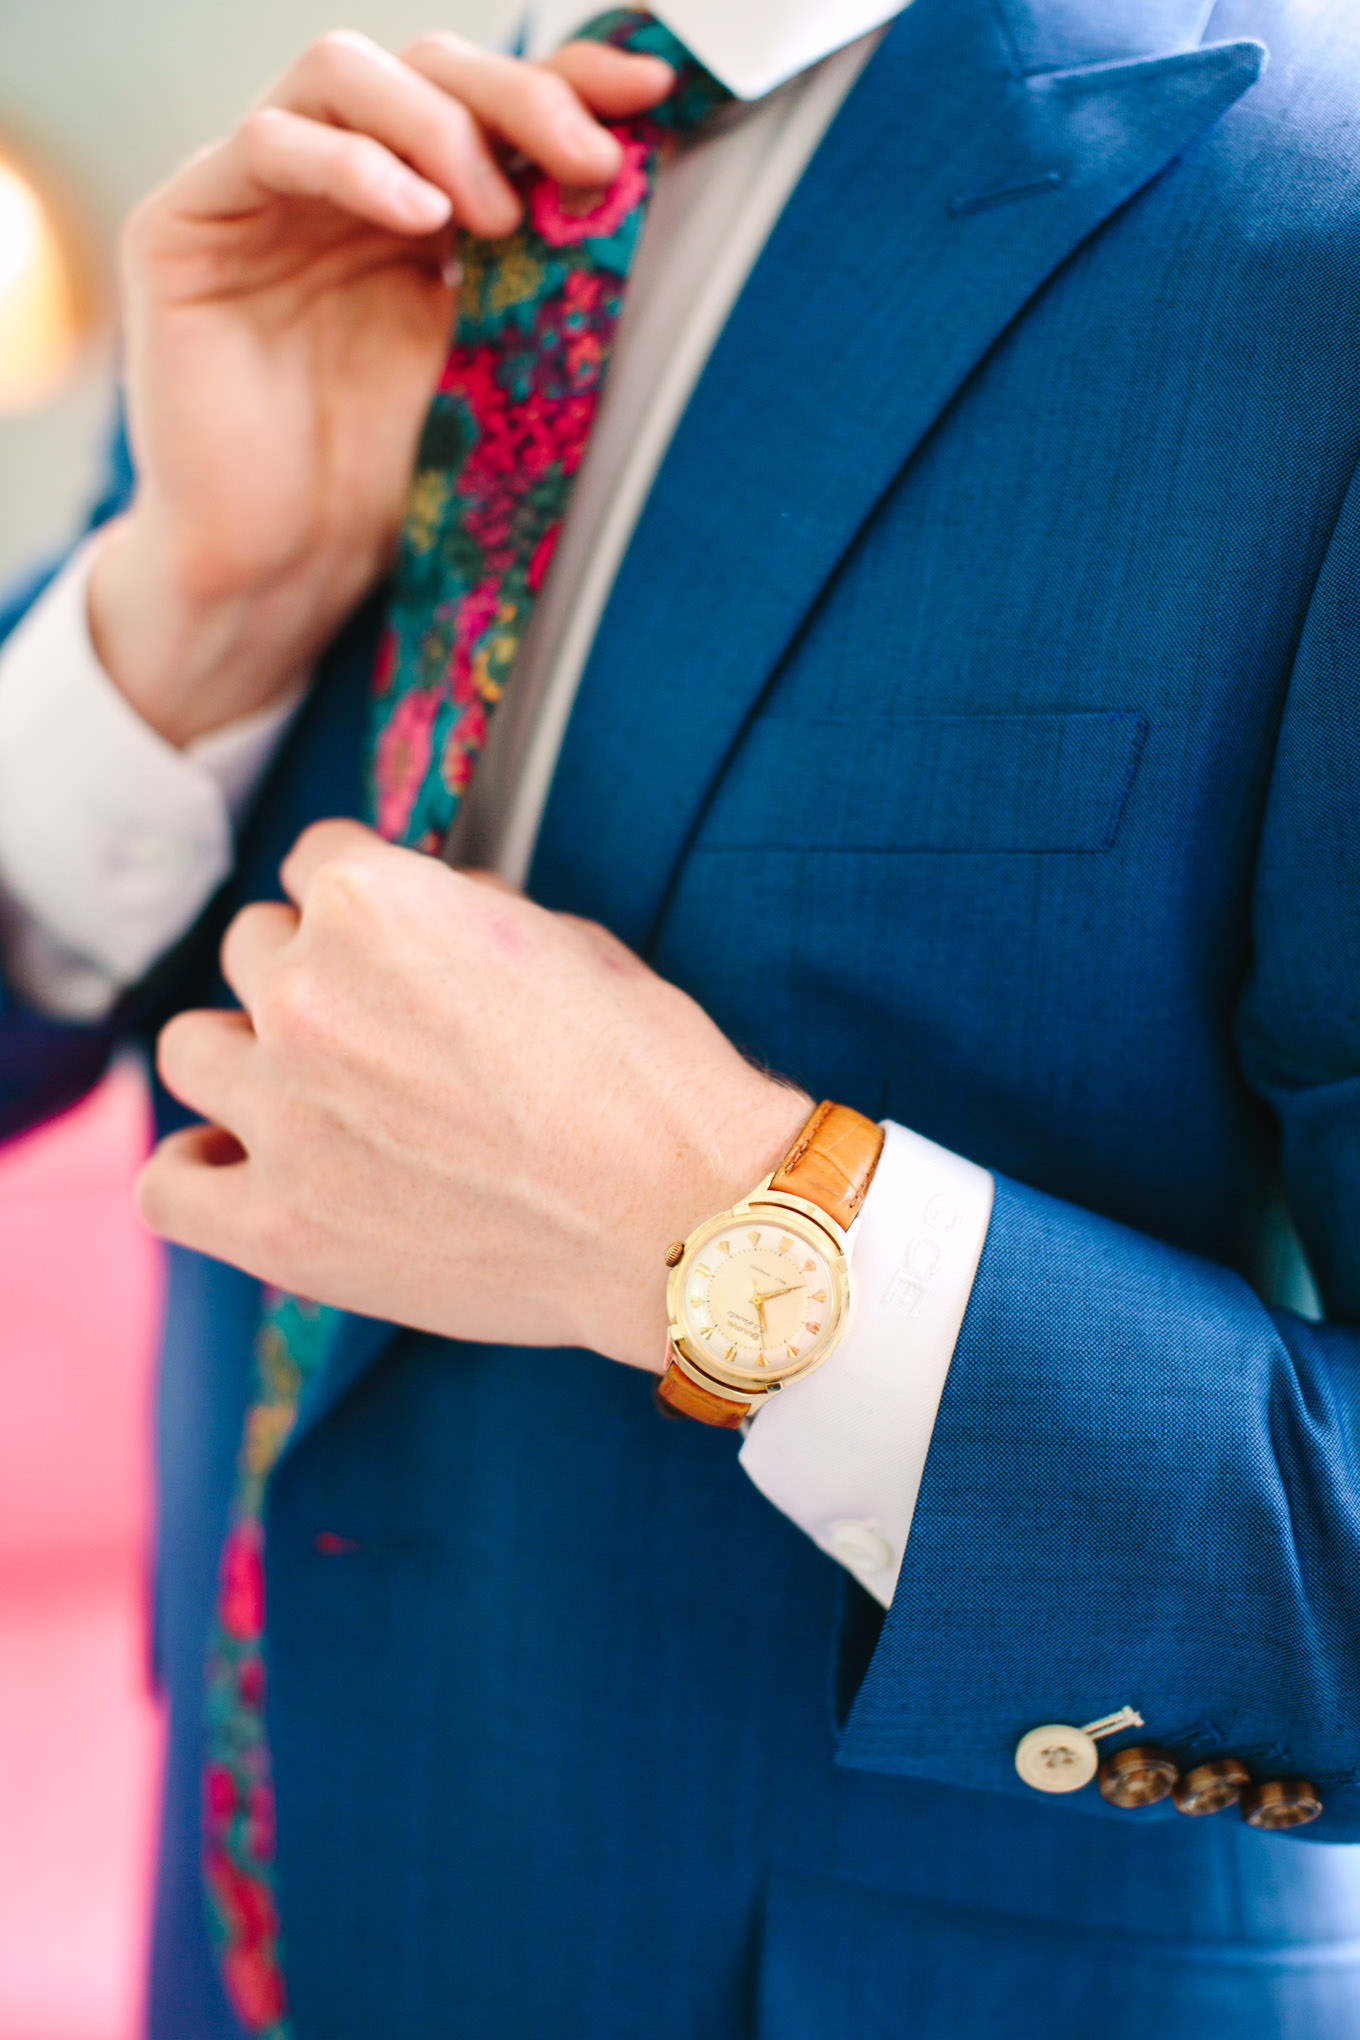 Groom gold watch detail. Two Disney artists create a unique and colorful Indian Fusion wedding at The Fig House Los Angeles, featured on Green Wedding Shoes. | Colorful and elevated wedding inspiration for fun-loving couples in Southern California | #indianwedding #indianfusionwedding #thefighouse #losangeleswedding   Source: Mary Costa Photography | Los Angeles